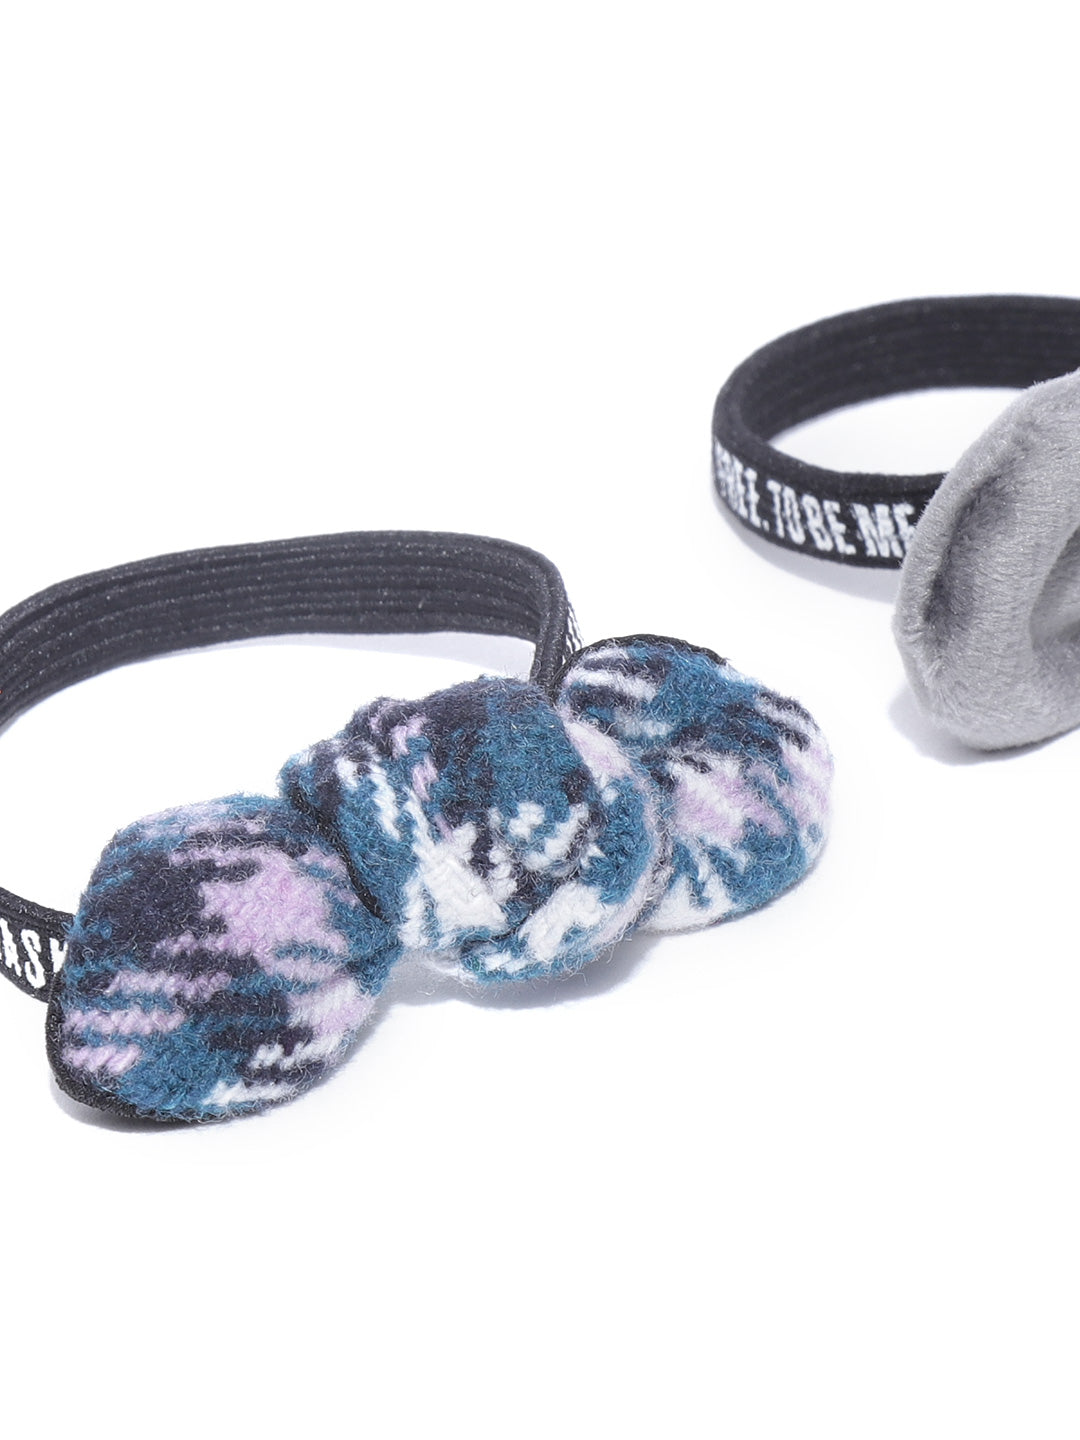 Blueberry set of 2 multi colour knot detailing scrunchie with grey hair clip